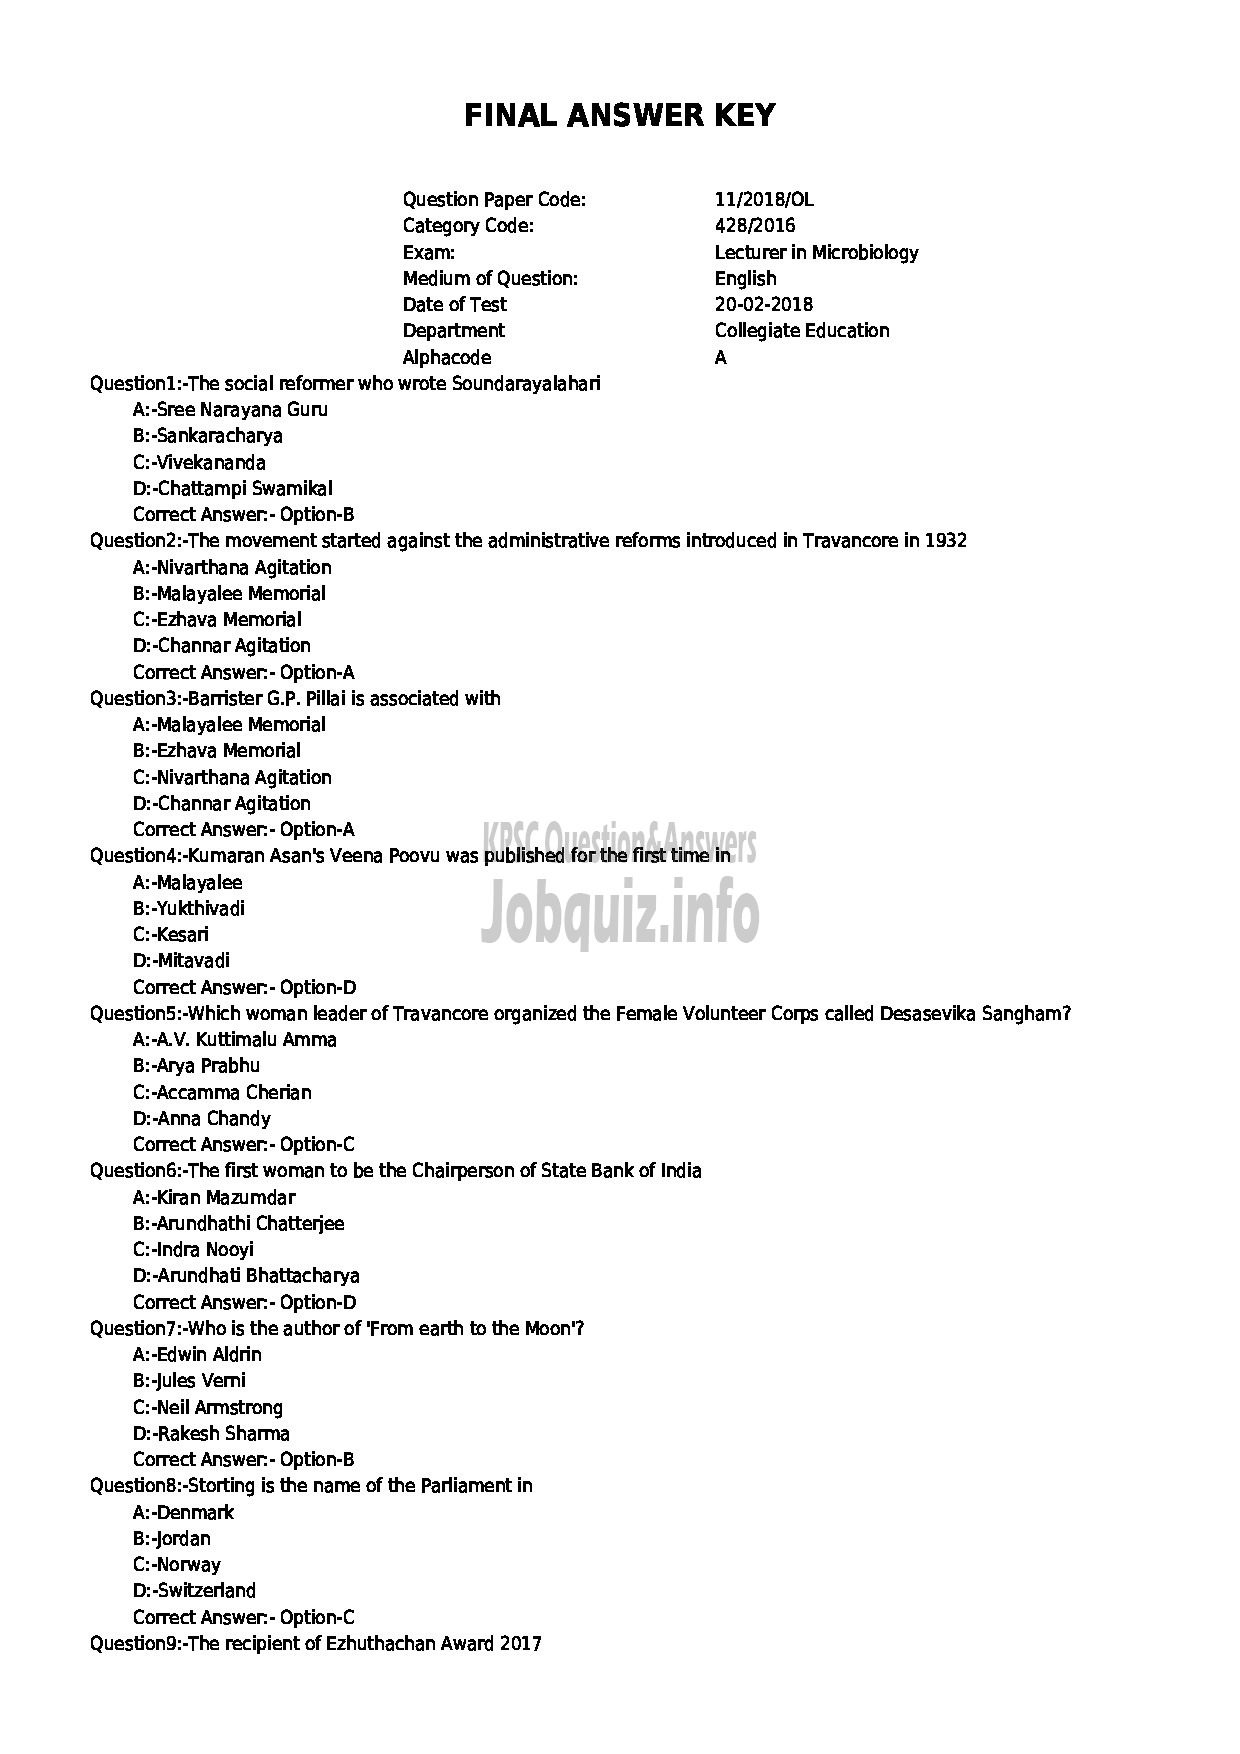 Kerala PSC Question Paper - LECTURER IN MICROBIOLOGY COLLEGIATE EDUCATION-1